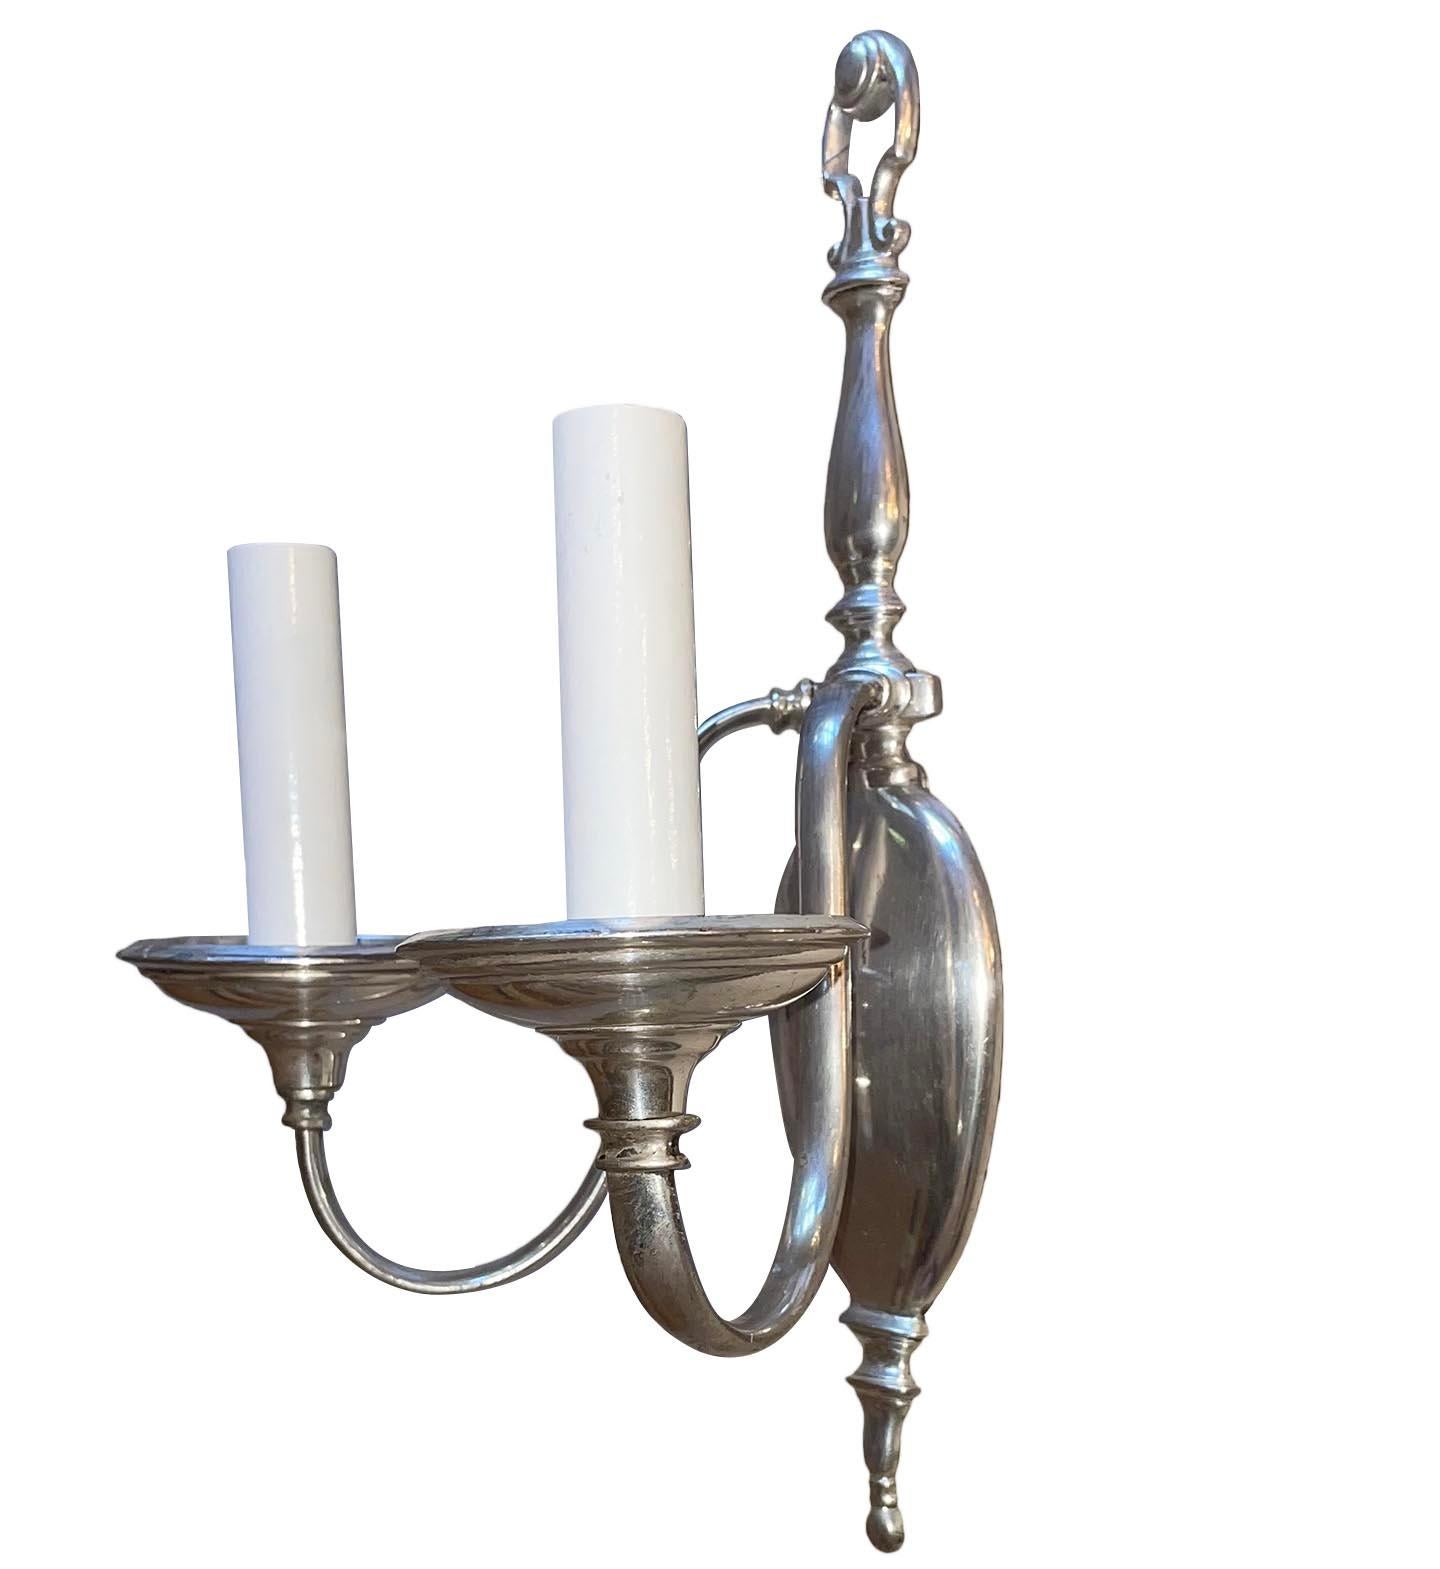 Pair of circa 1920's American neoclassic style silver plated sconces.
Measurements:
Height: 13.75